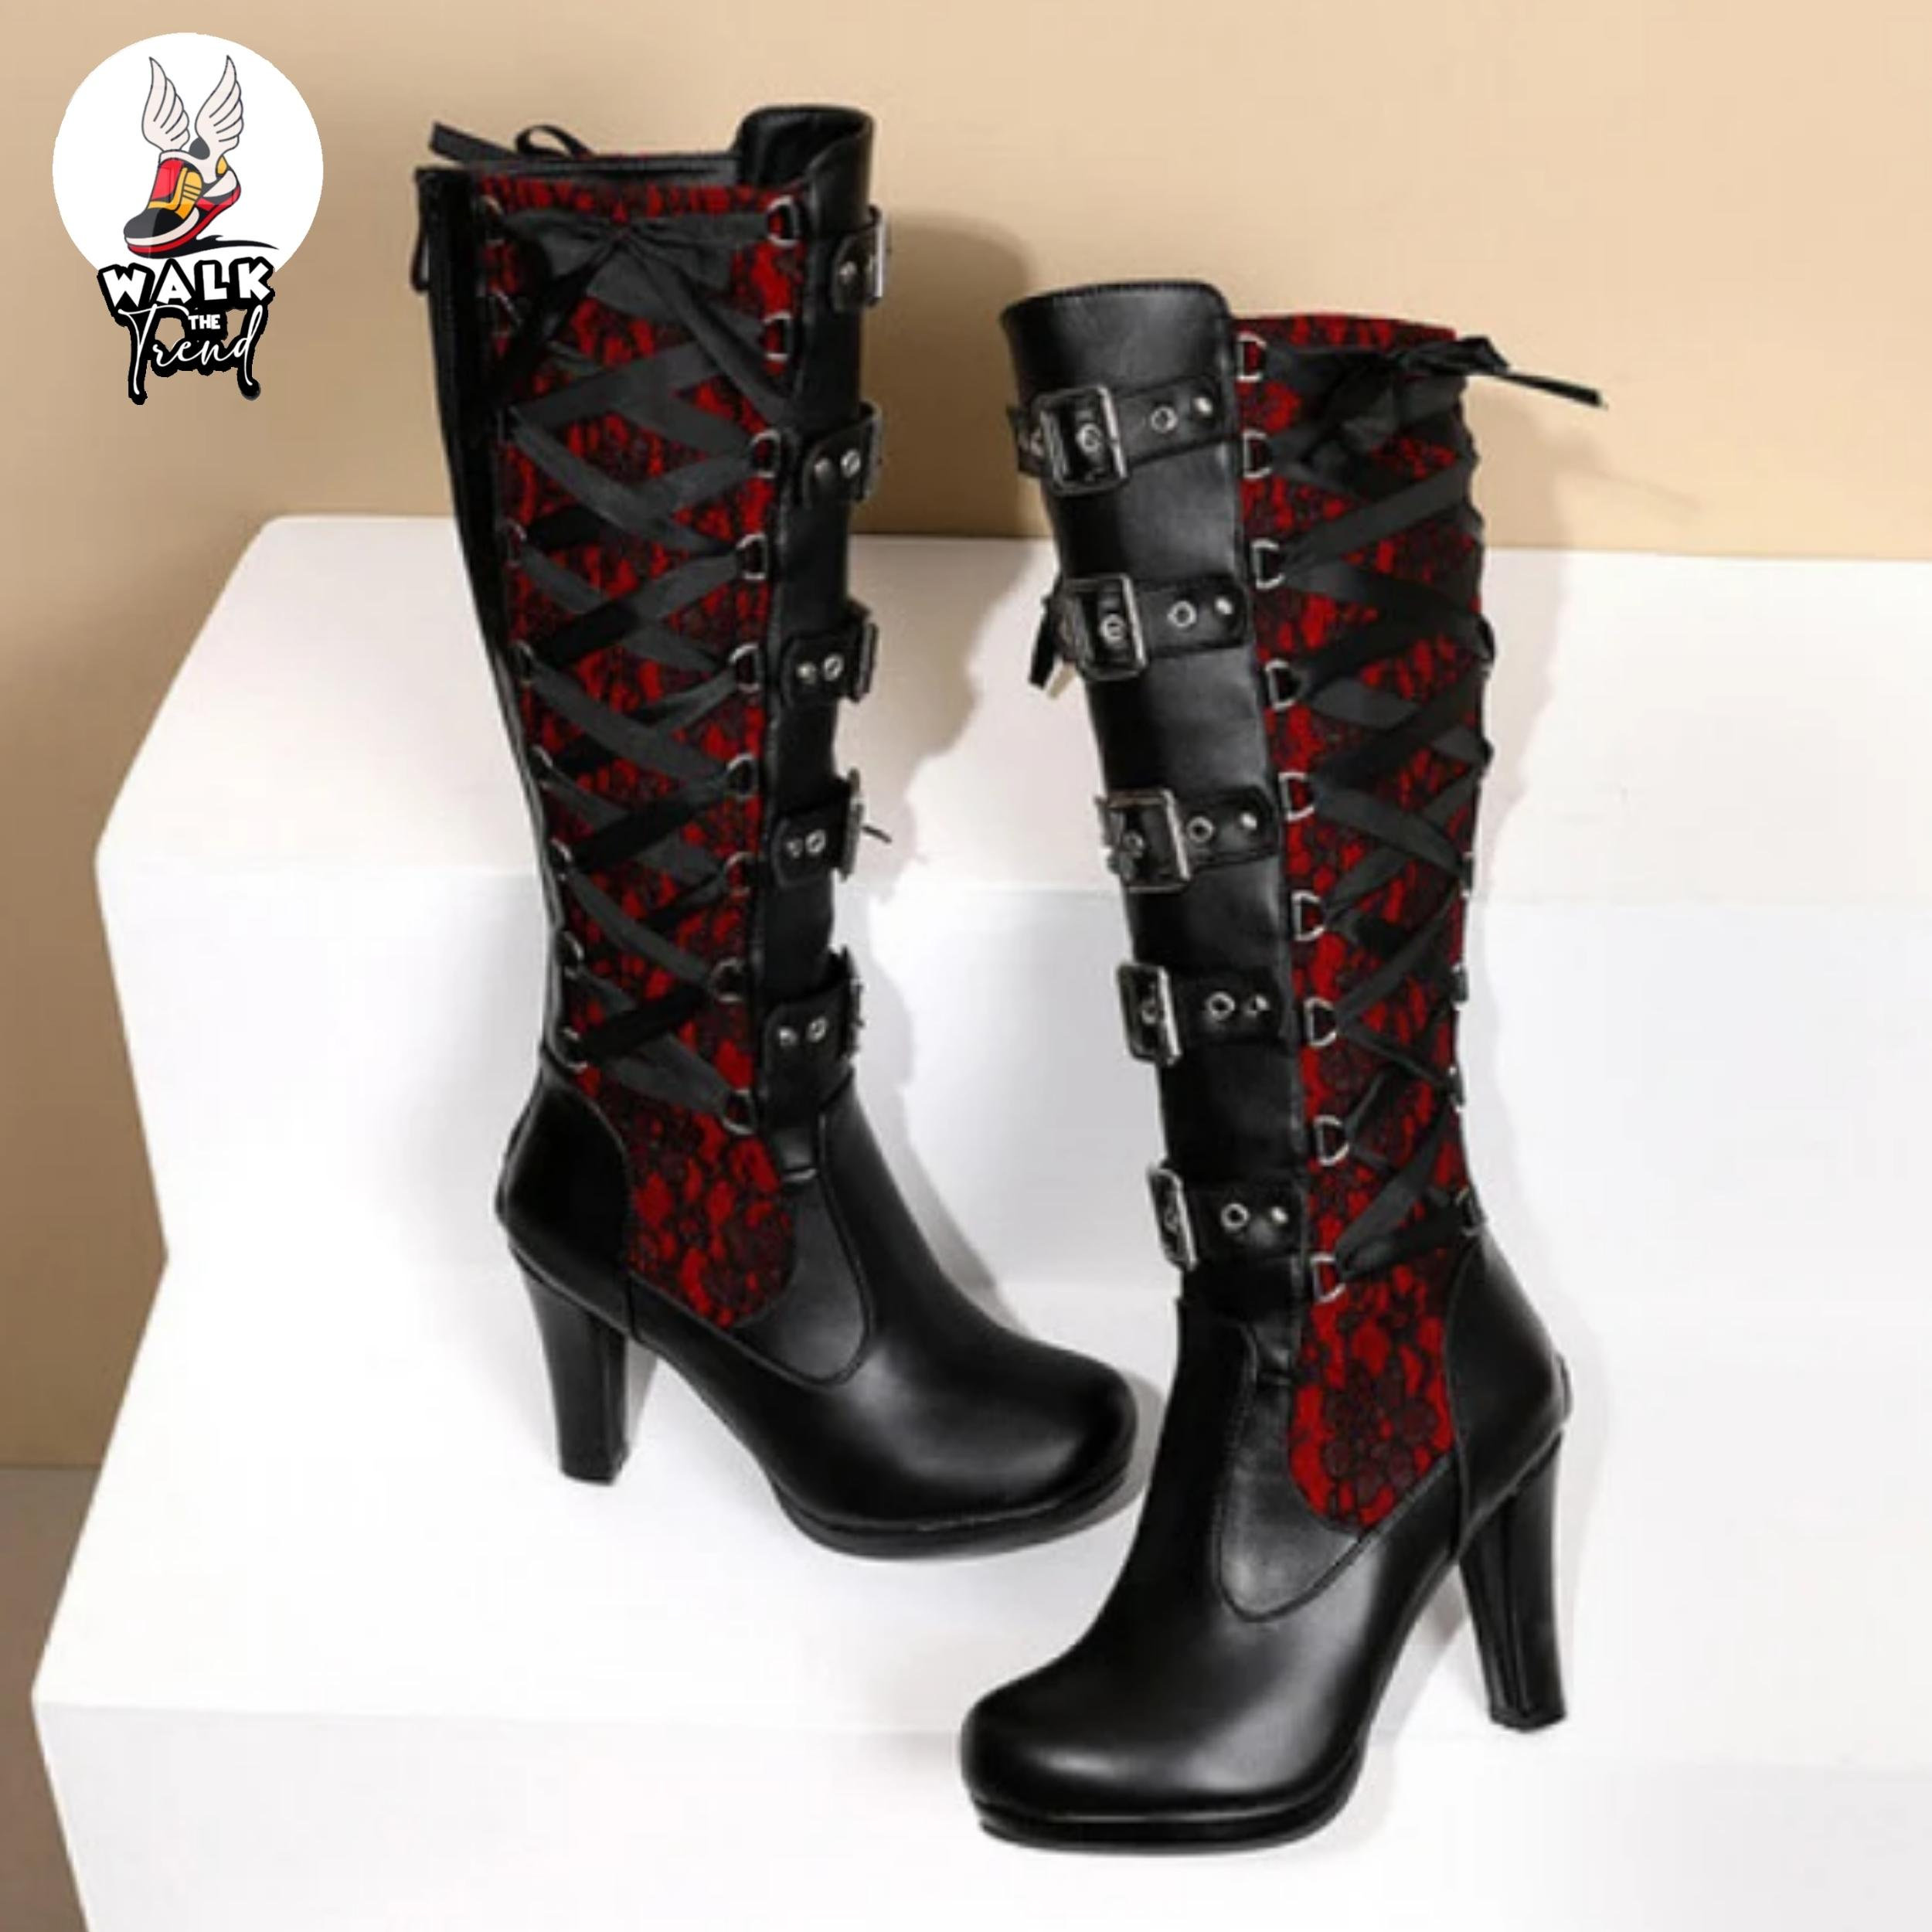 Gothic Renegade Chunky Platform Boots